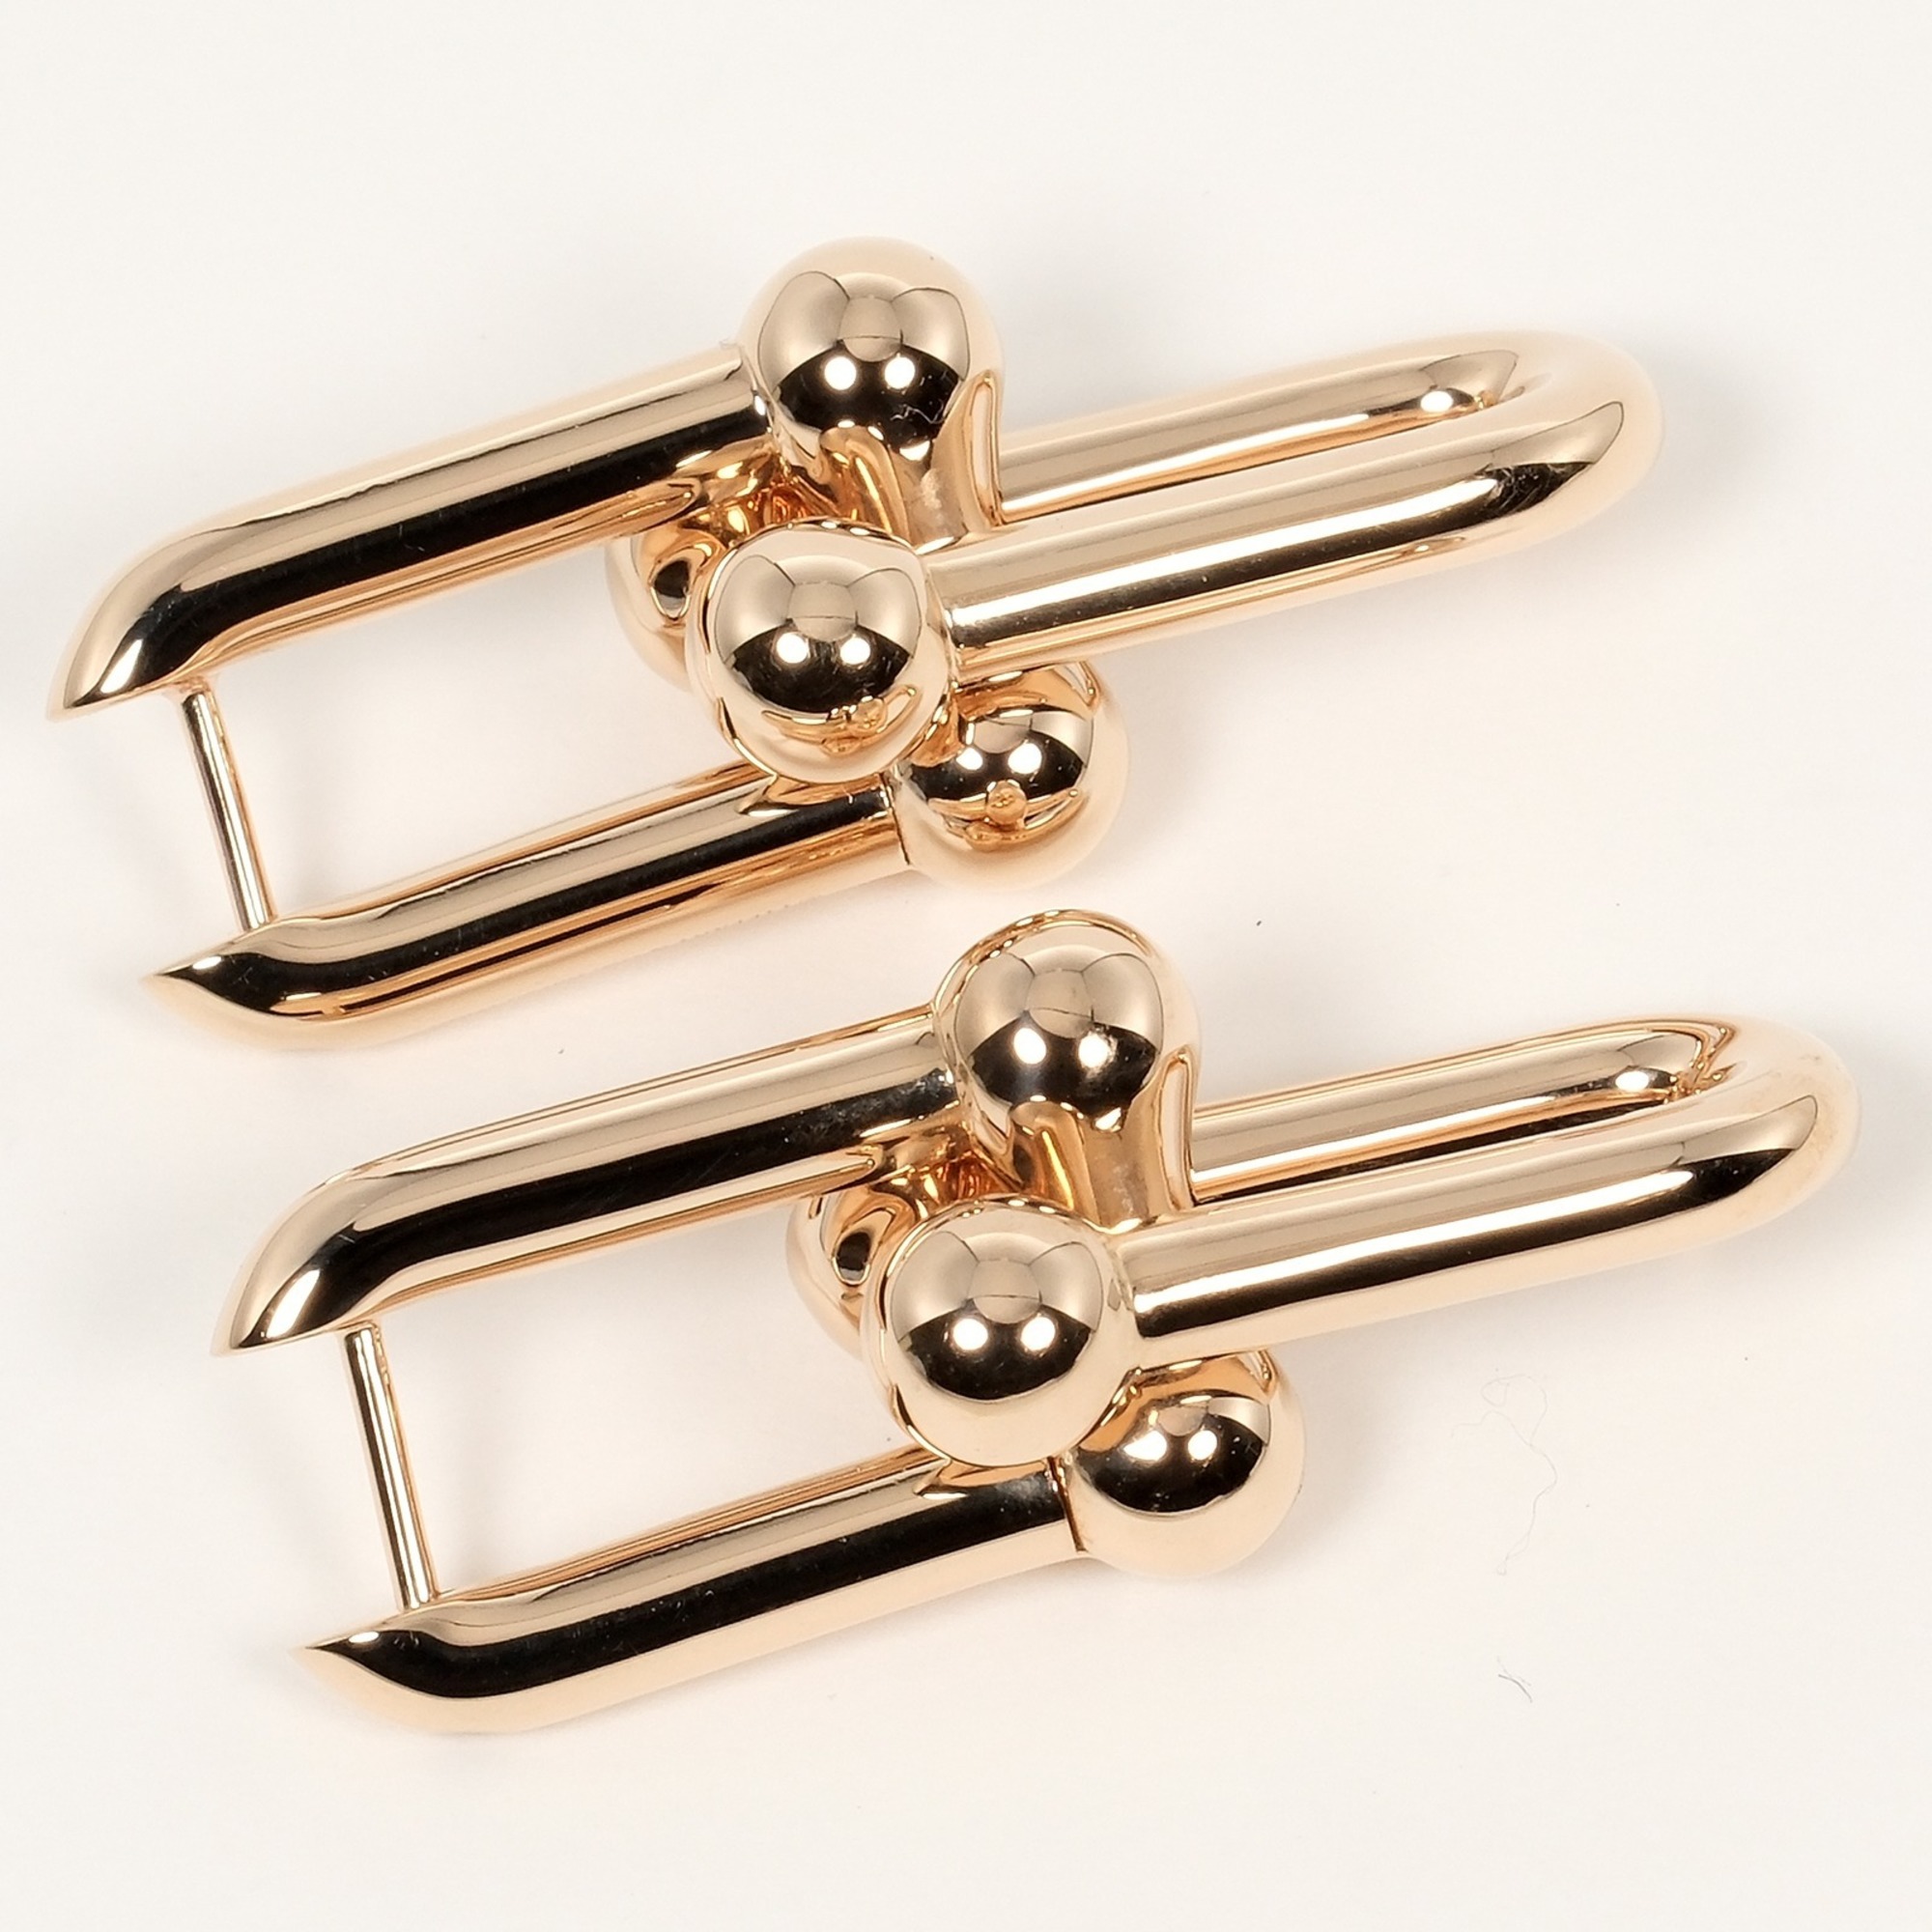 Tiffany TIFFANY&Co. Hardware Large Earrings K18 PG Pink Gold Approx. 11.6g T121724520